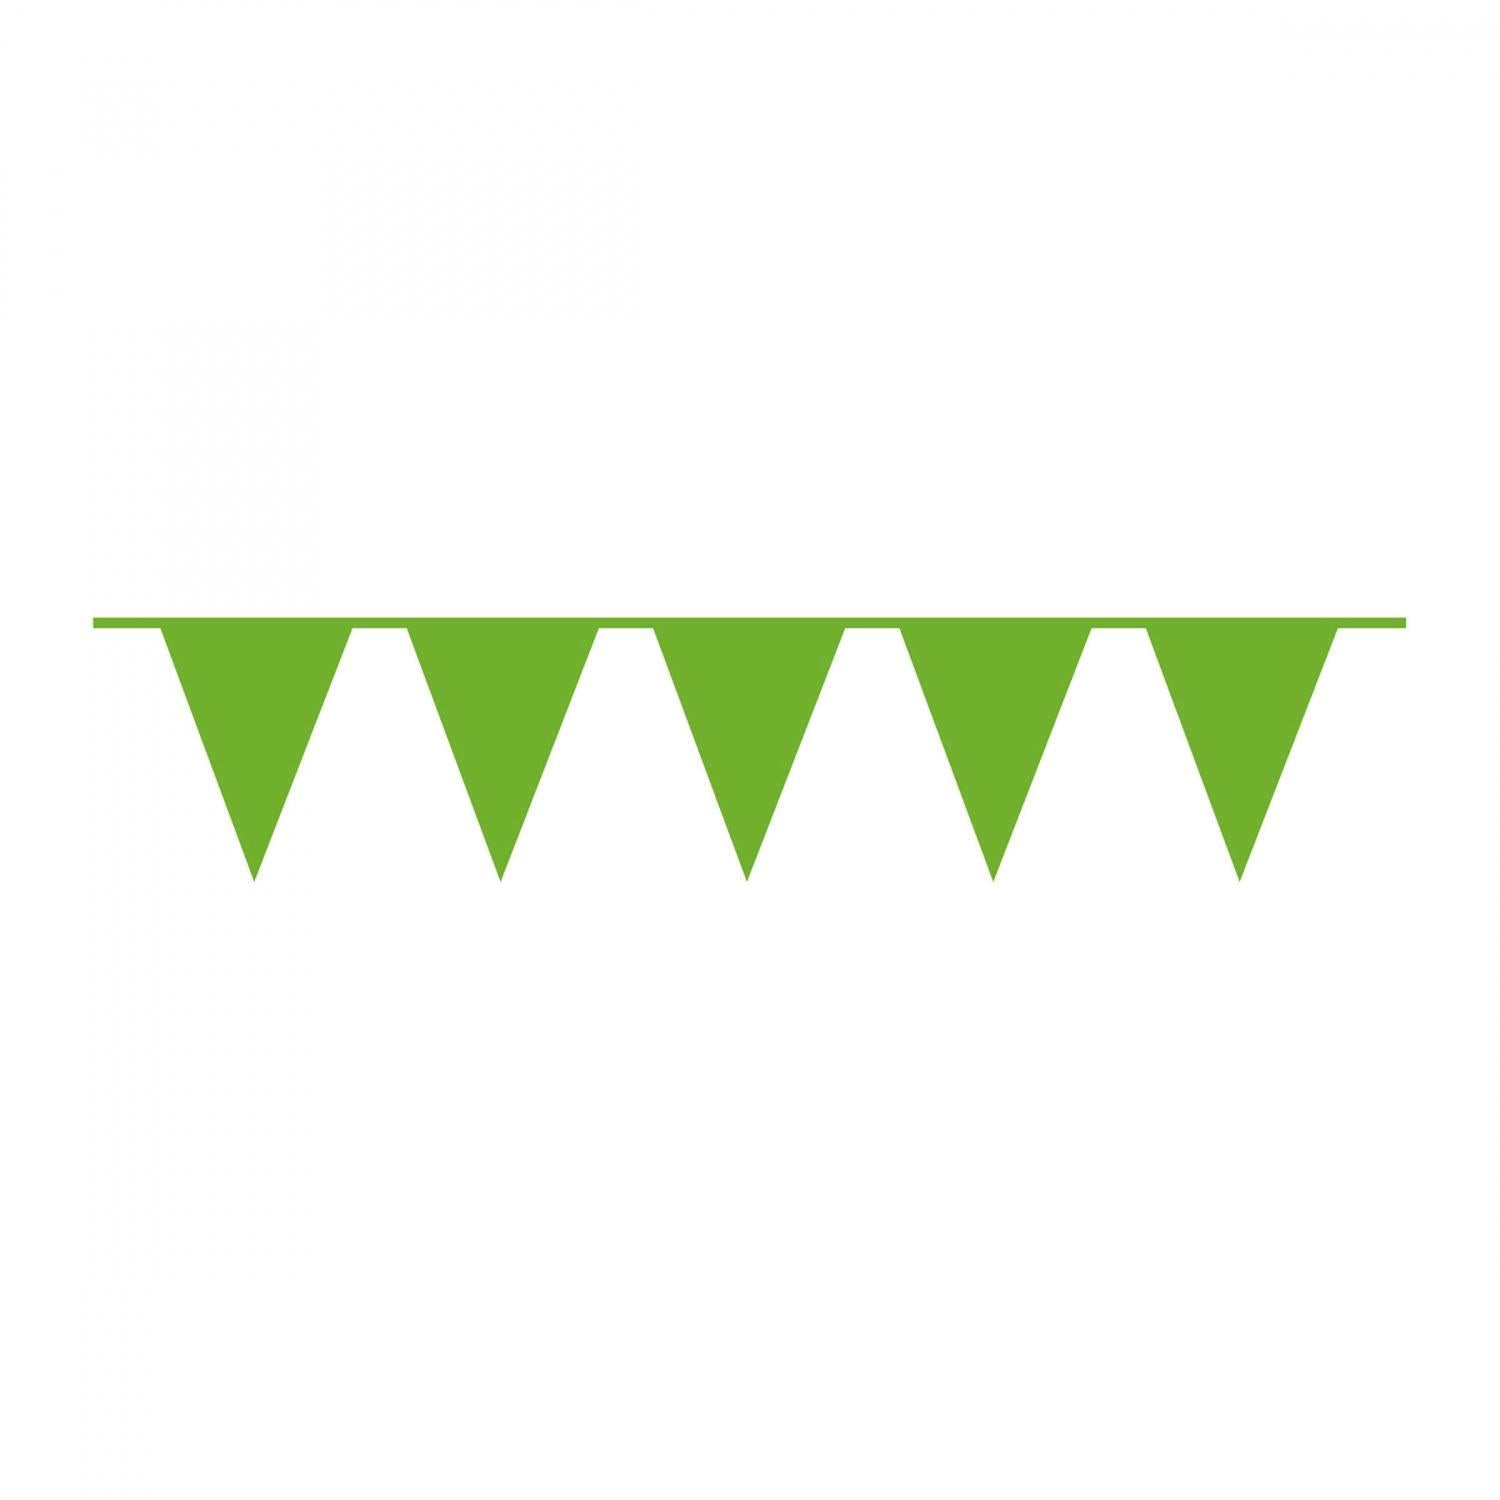 Kiwi Green Pennant Banner Plastic 10m Decorations - Party Centre